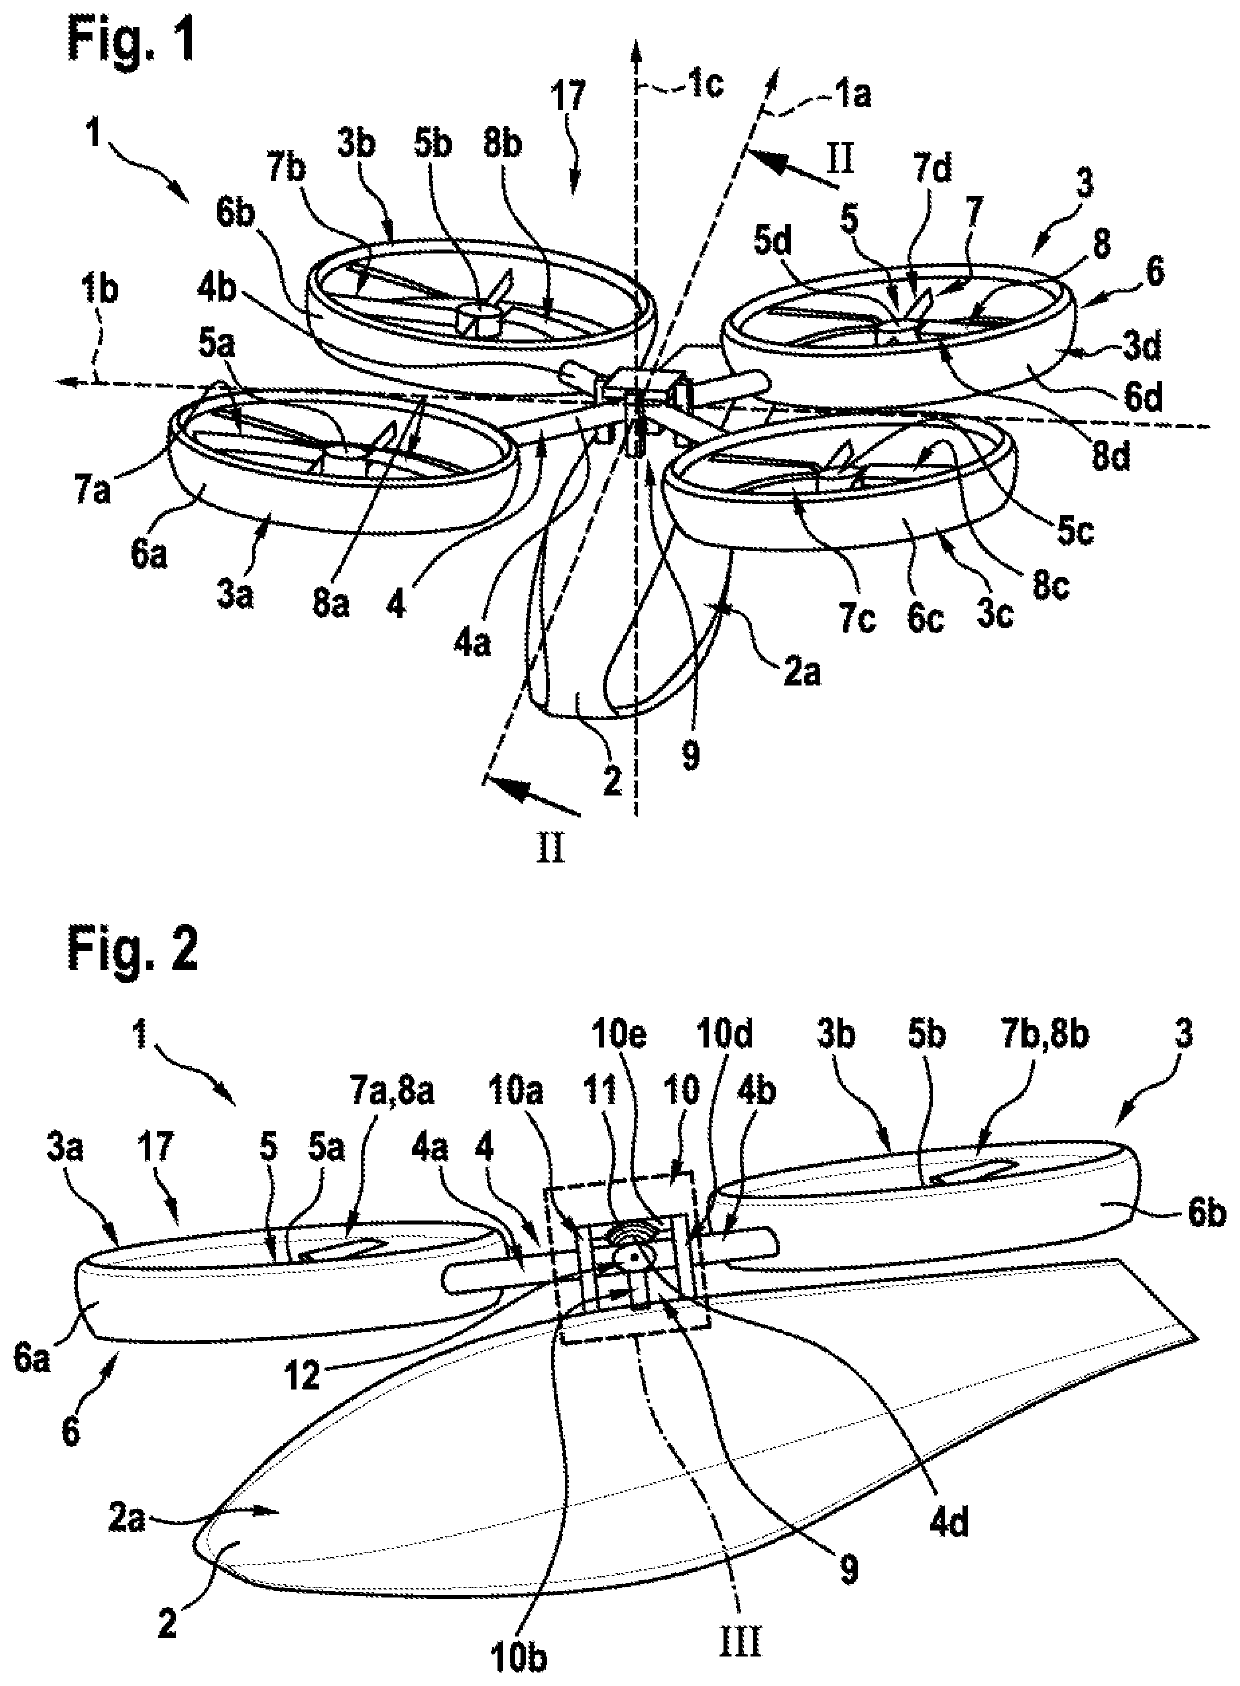 Multirotor aircraft with an airframe and a thrust producing units arrangement